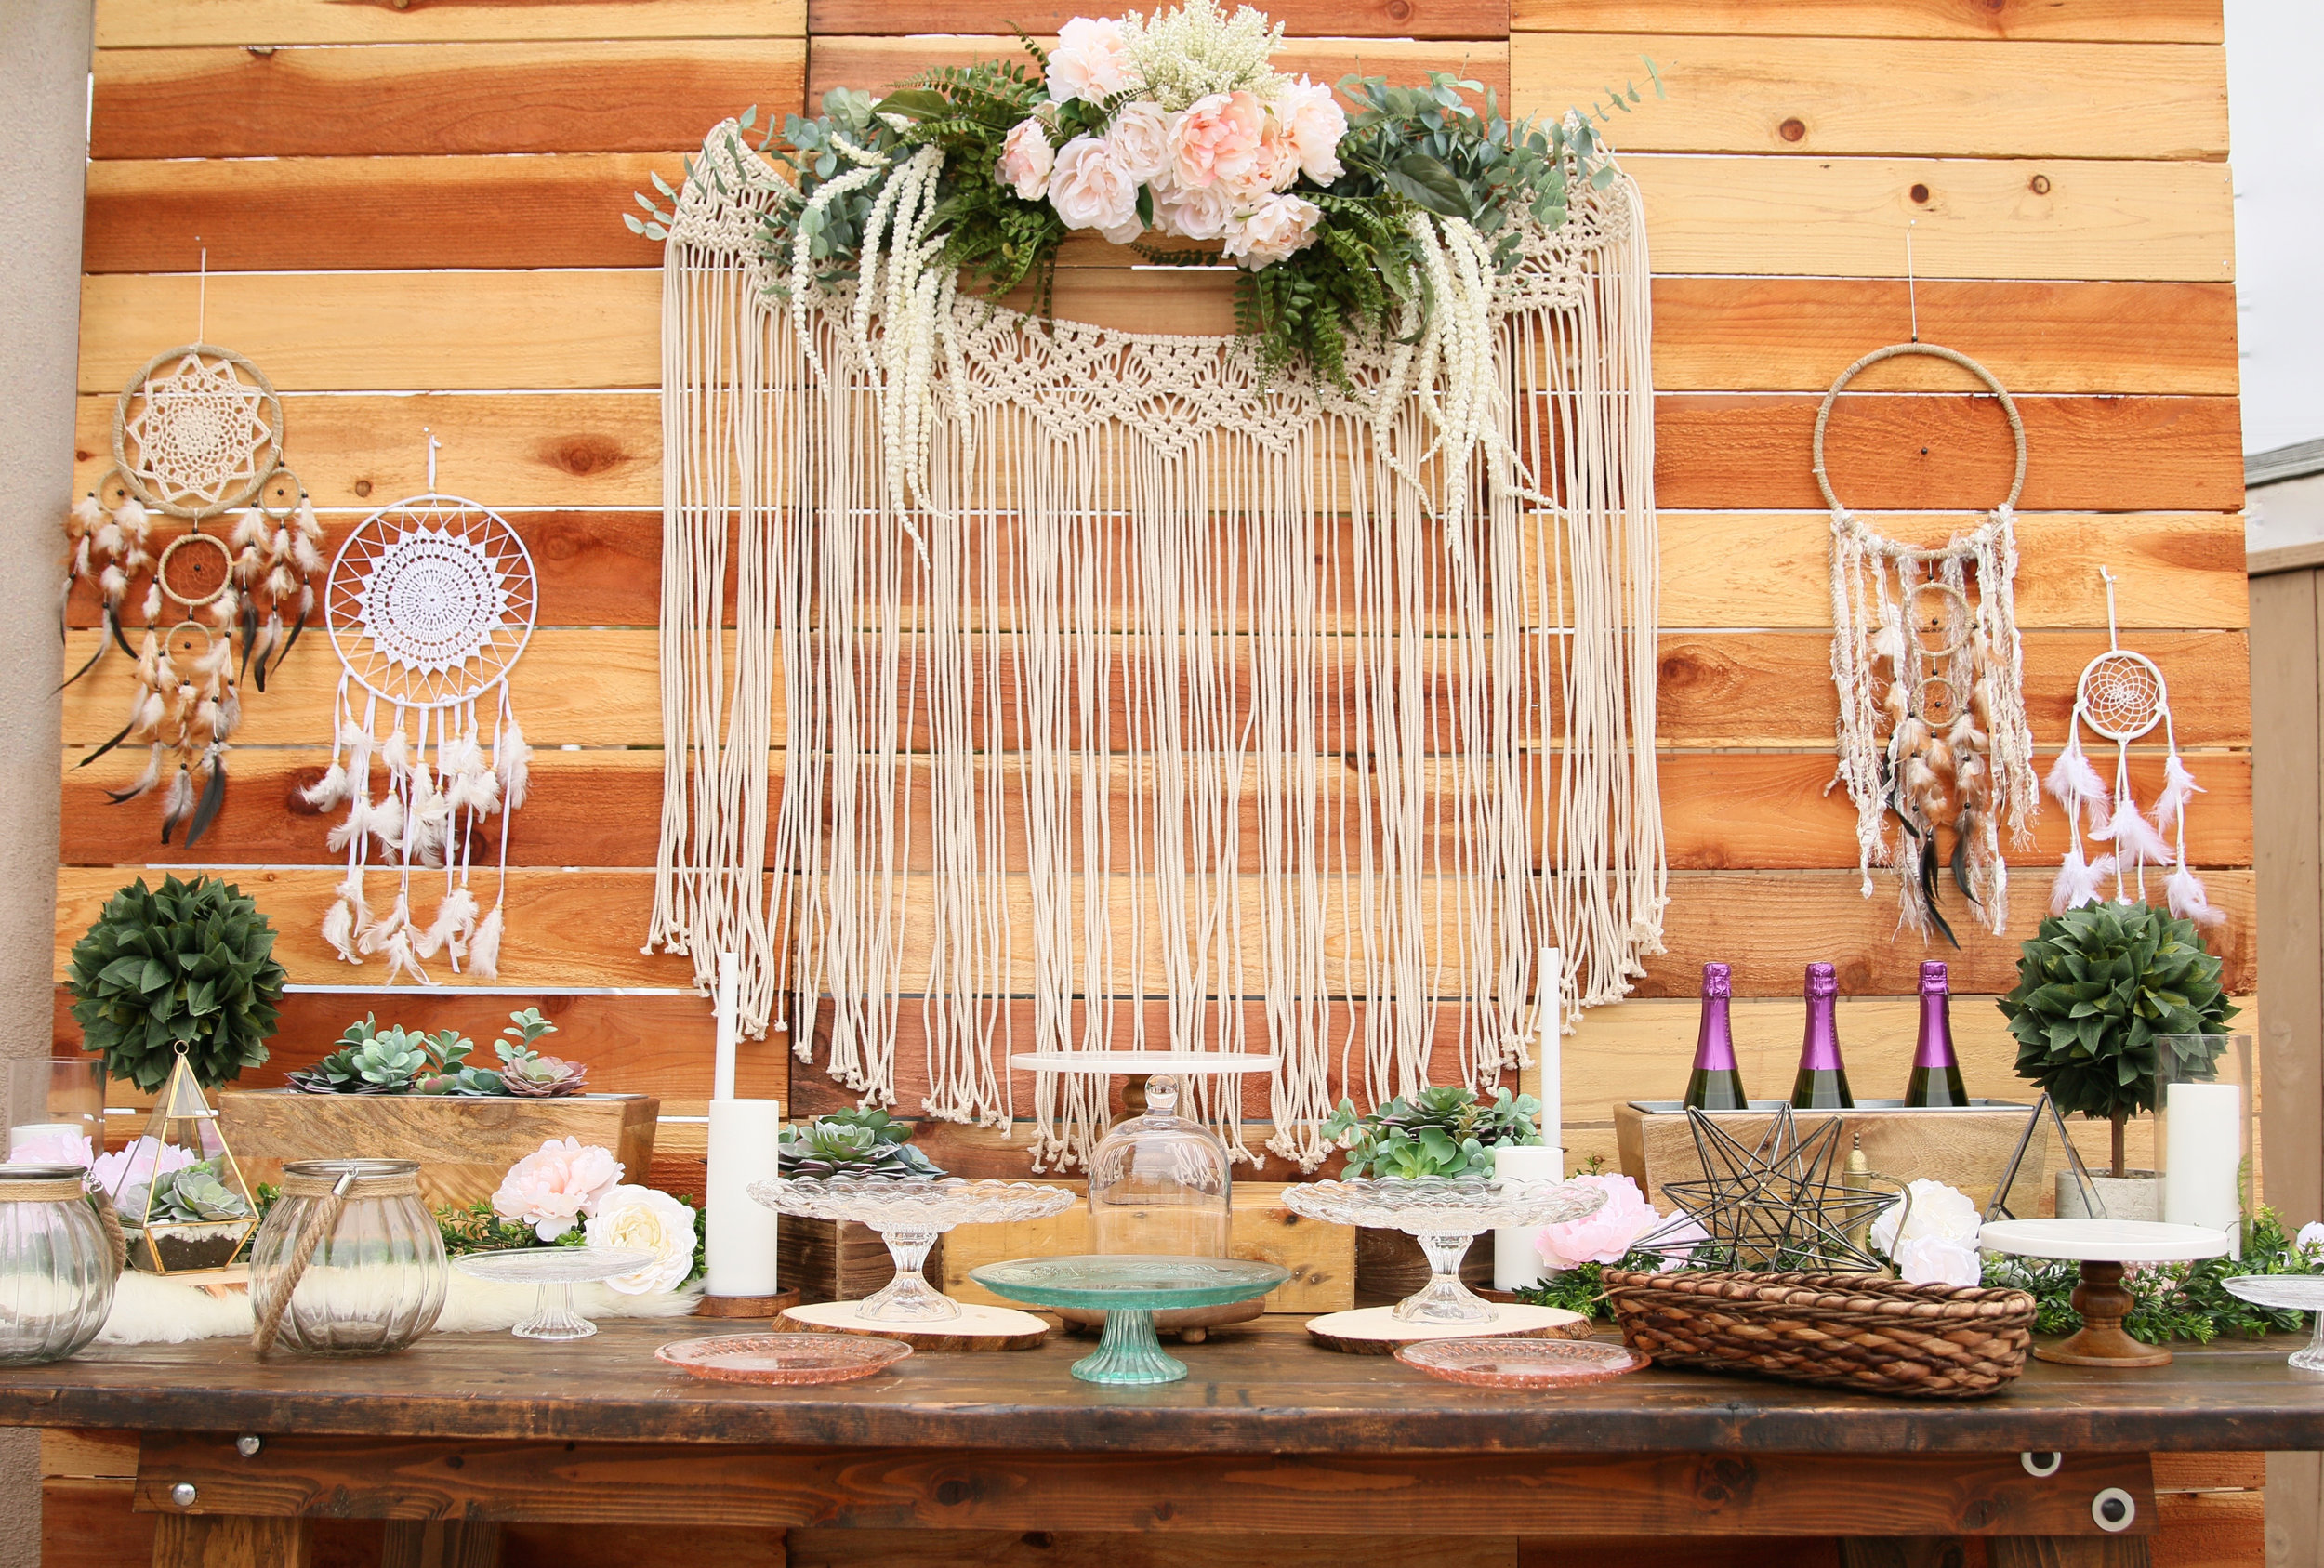 Copy of A gorgeous pre-curated rental collection with succulents, pops of blush, dreamcatchers, and rustic wood accents. Make it yours for your next baby or bridal shower! @inJOYtheParty